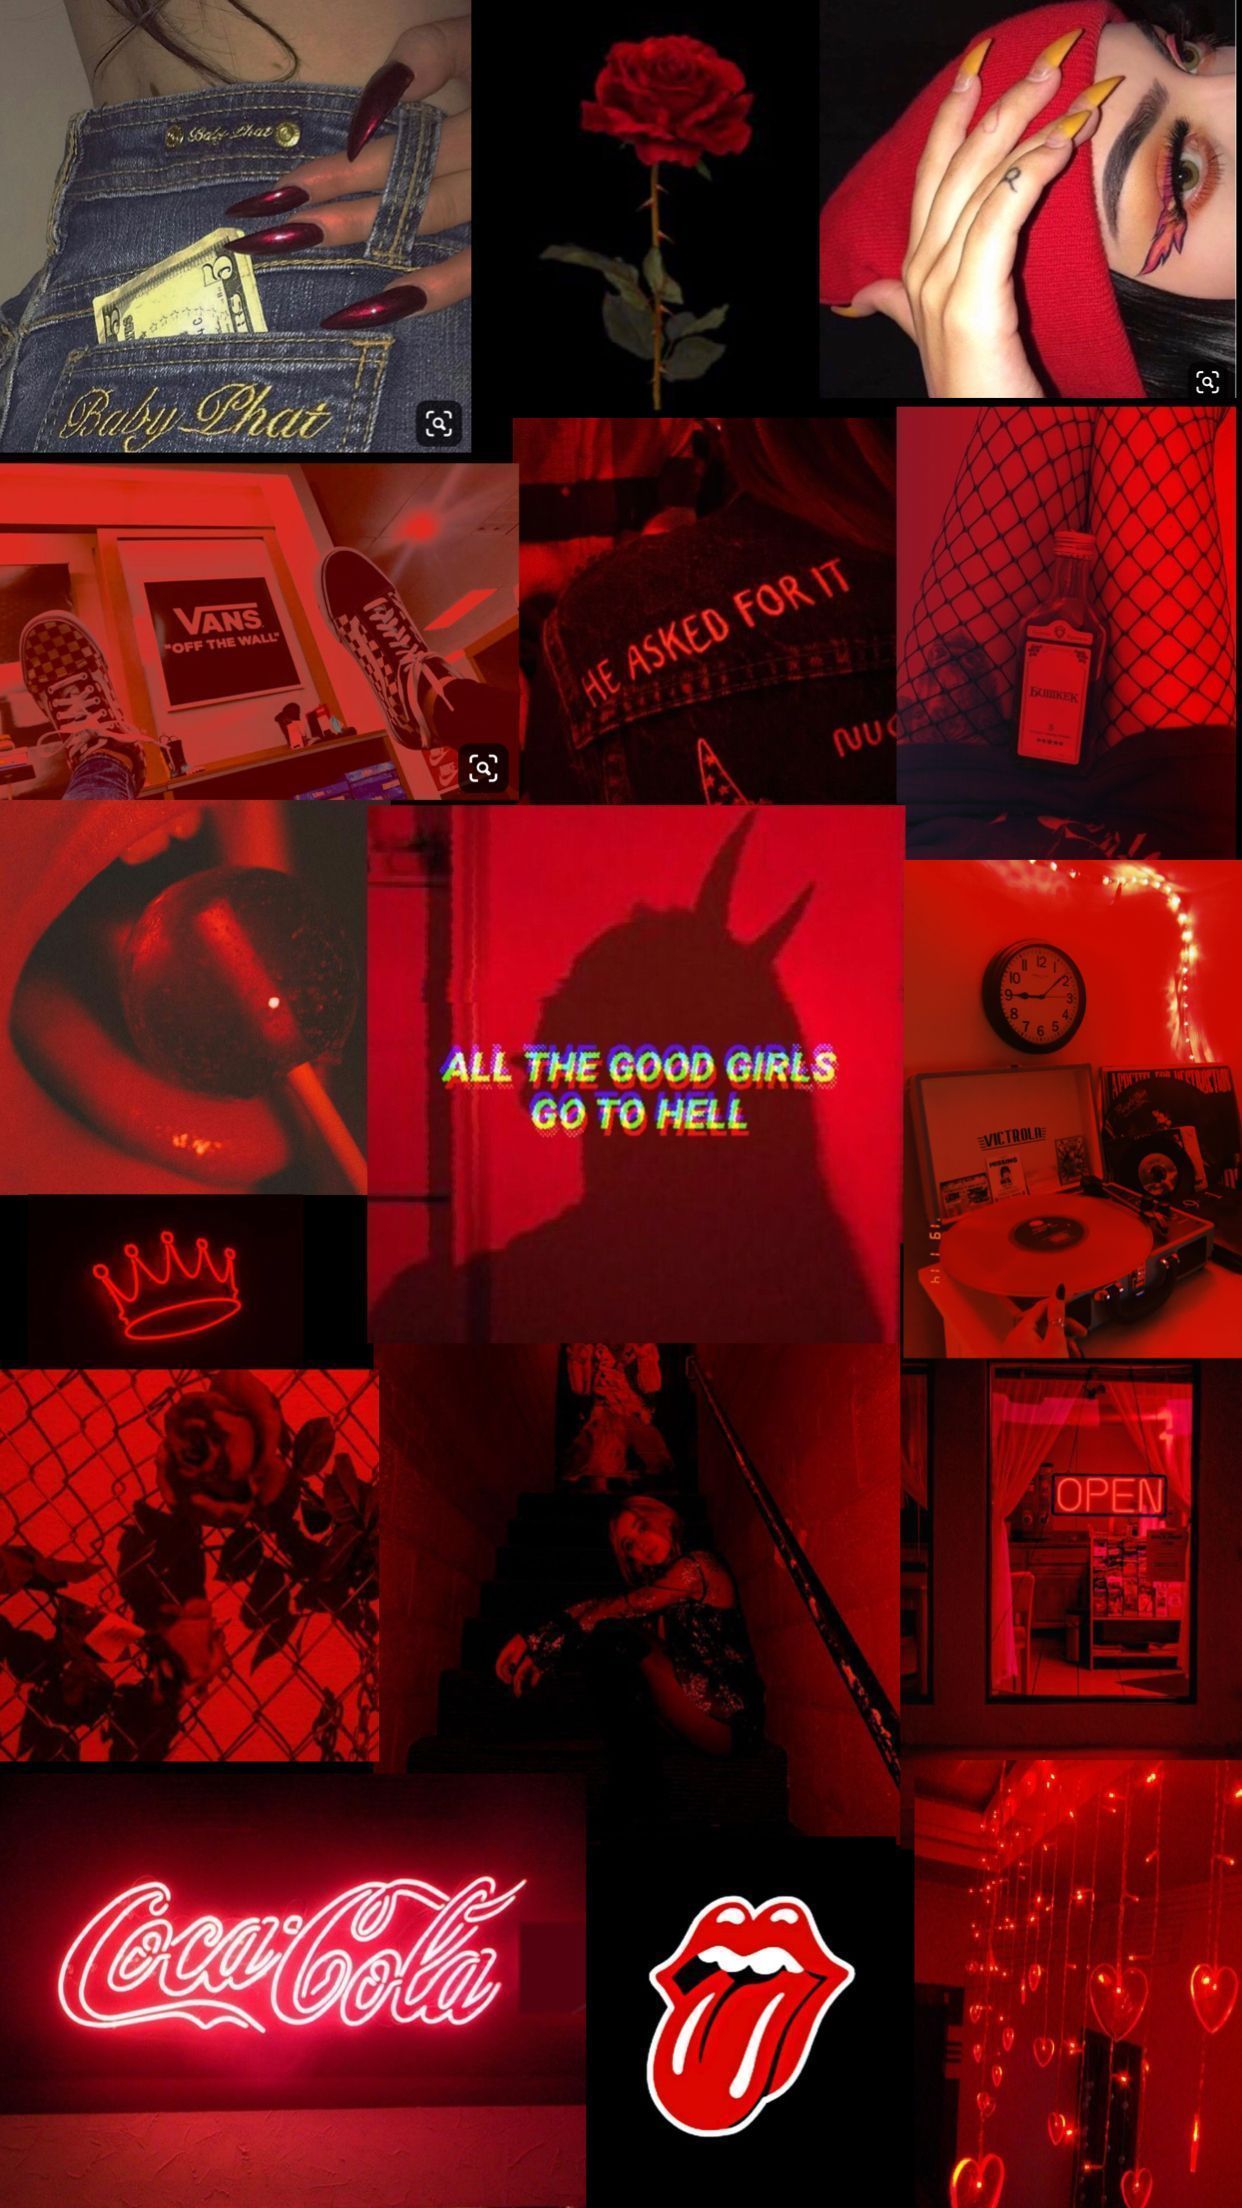 A collage of images with red and black - Red, iPhone red, iPhone, neon red